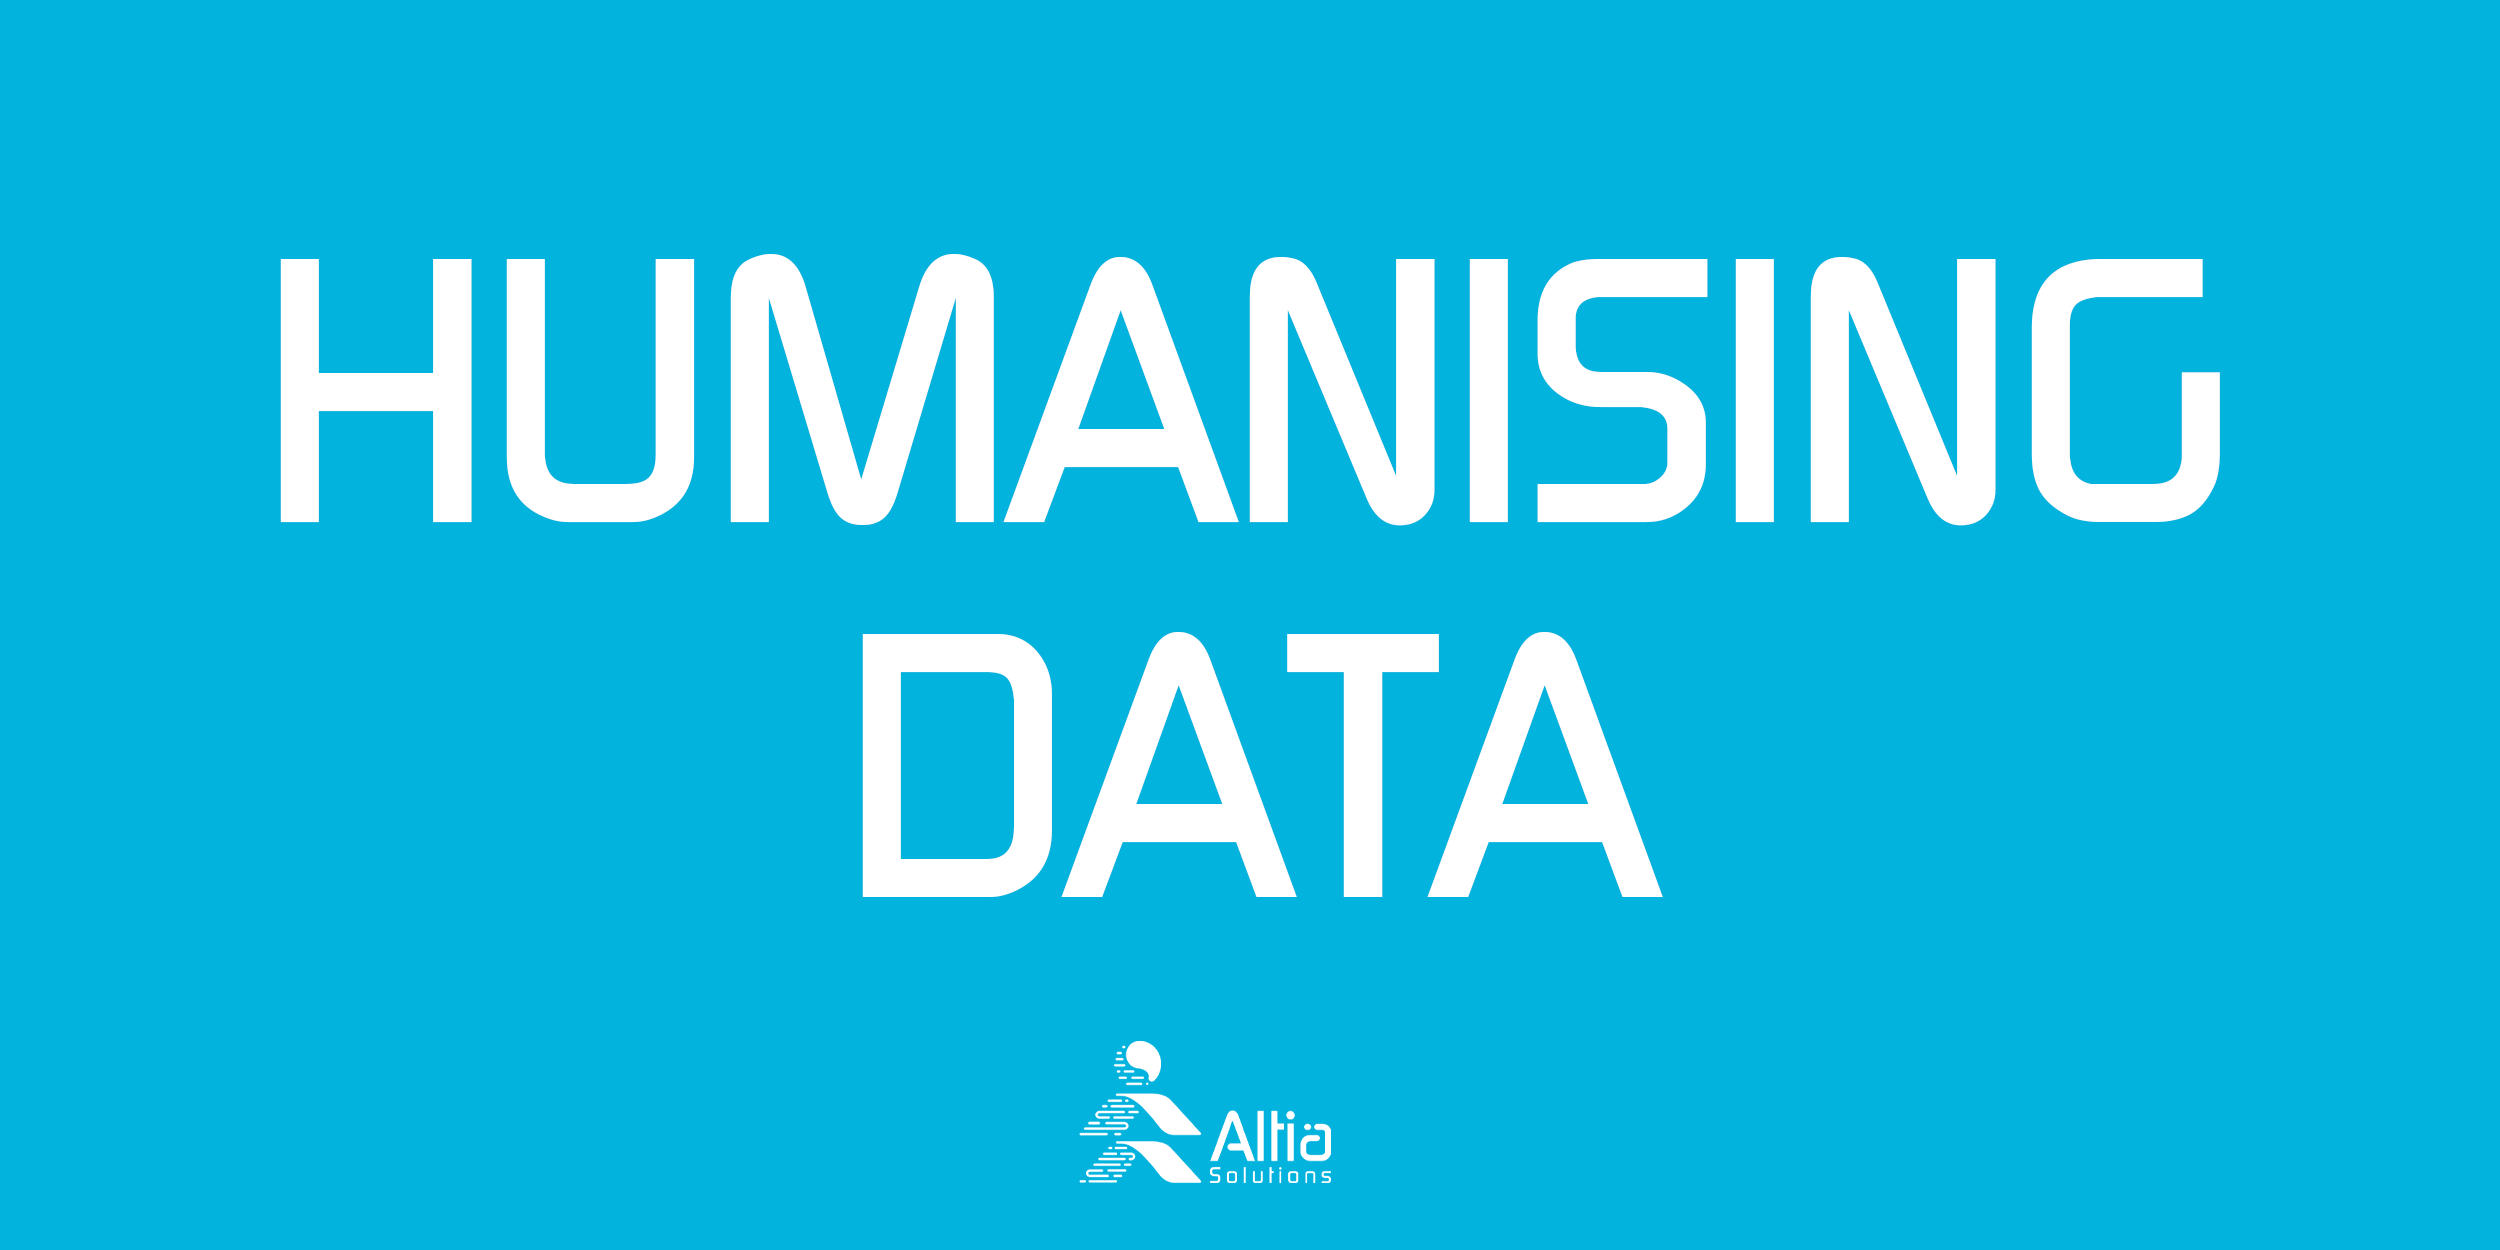 A brand marketing case-study for software companies, Humanising Data, Altia tag-line